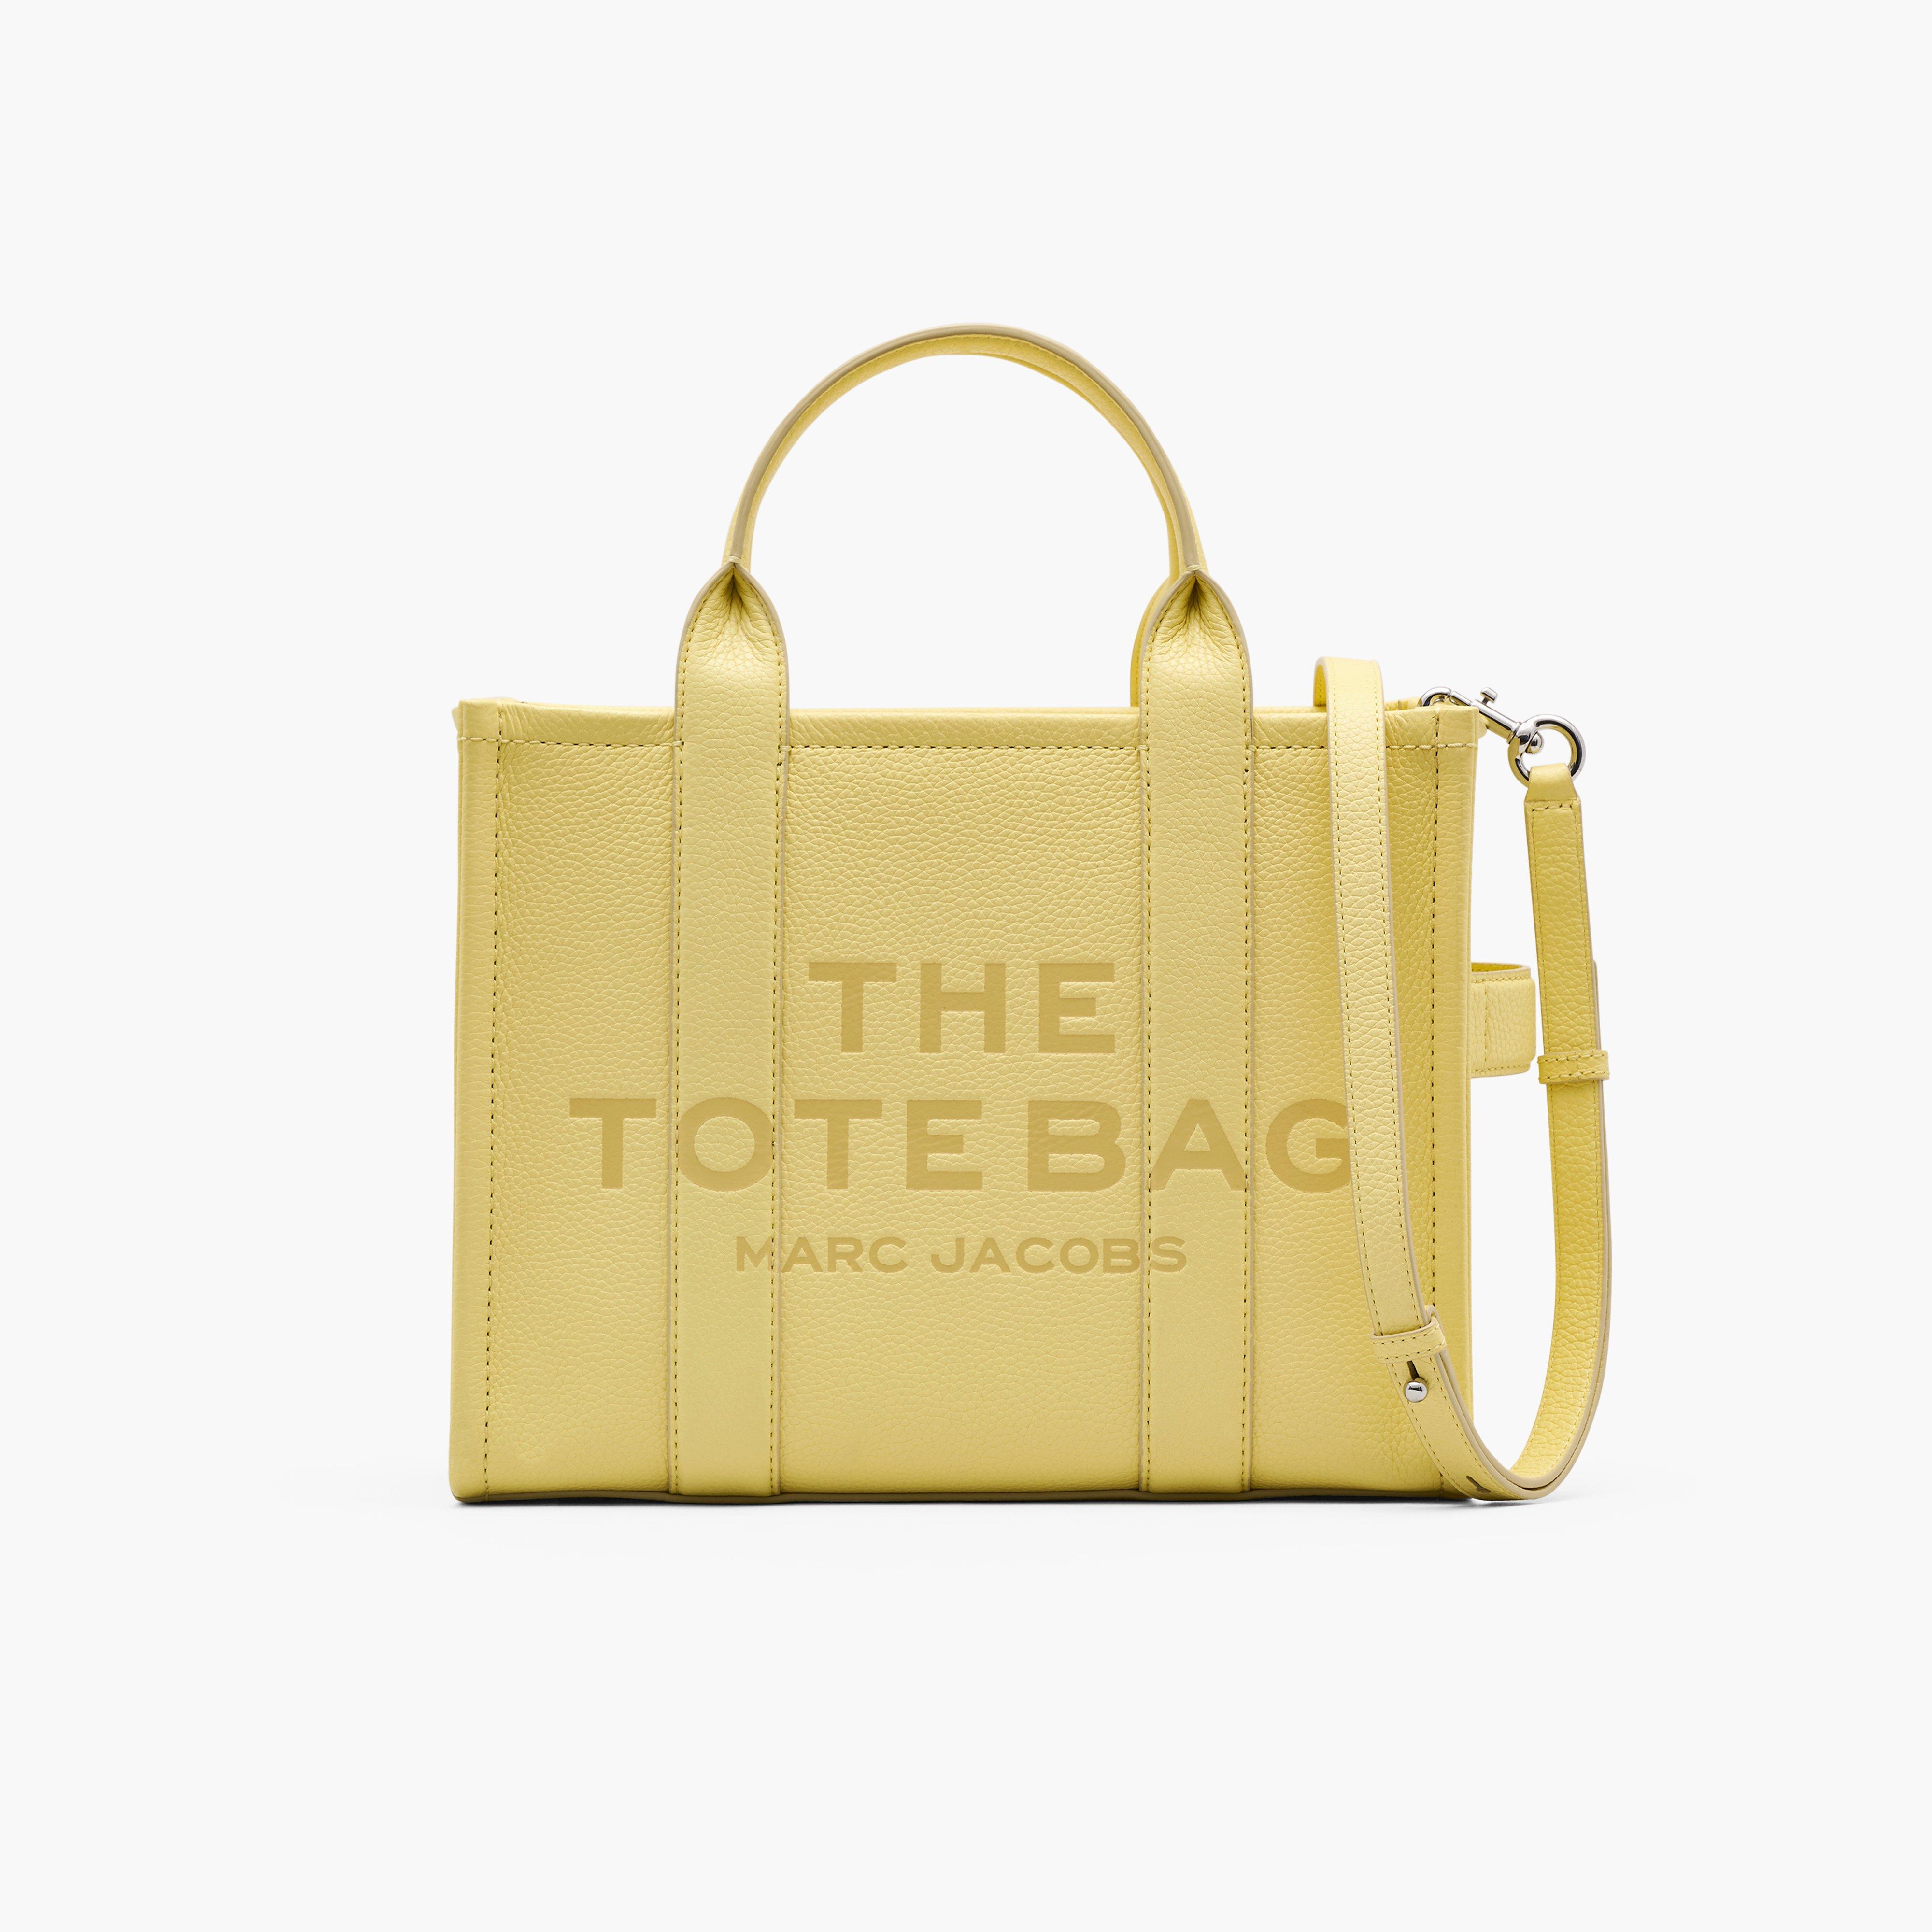 Marc by Marc jacobs The Leather Medium Tote Bag,CUSTARD